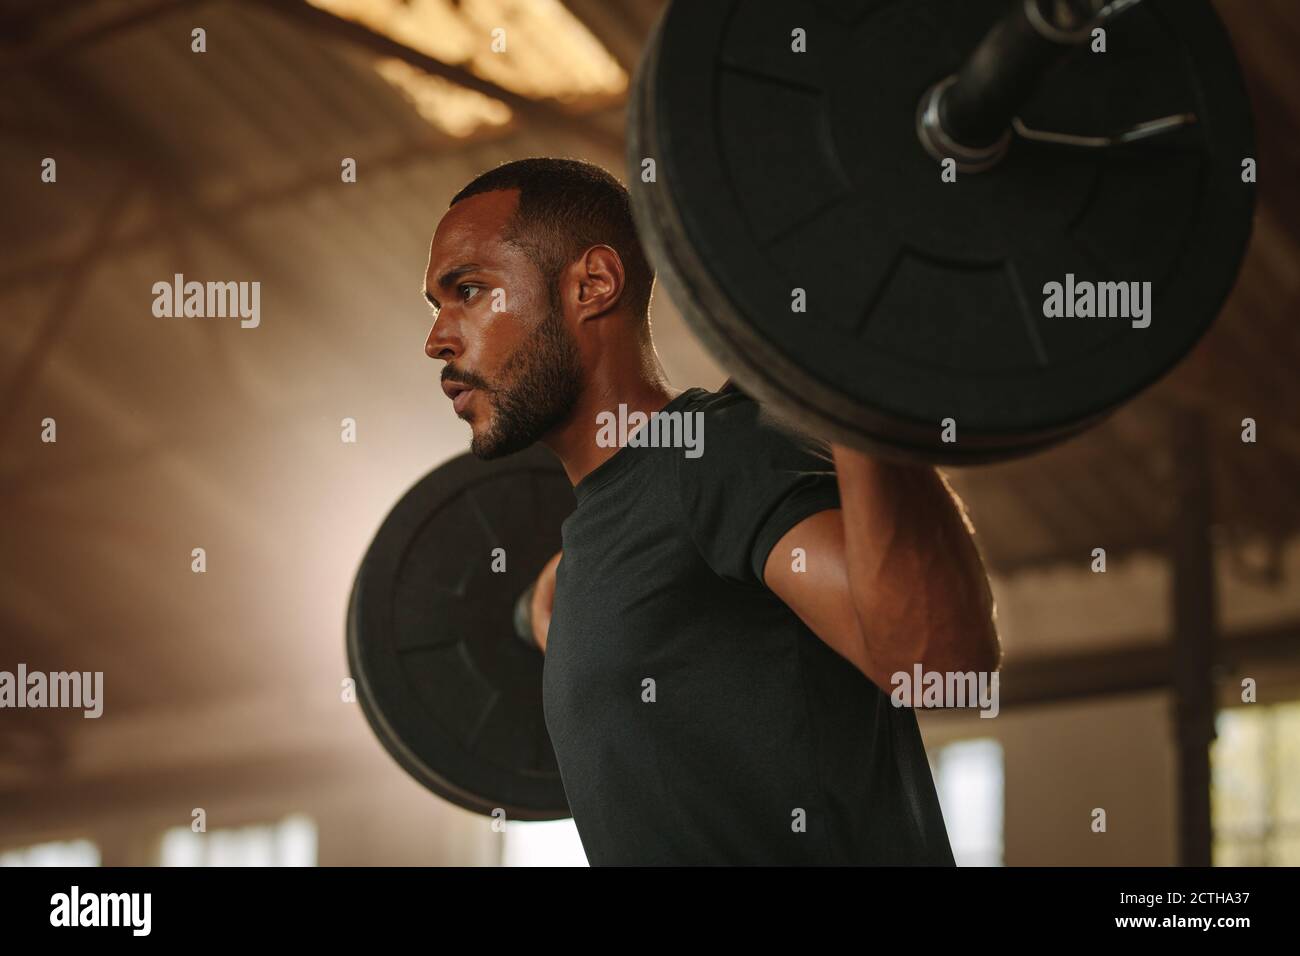 Man exercising with barbell. Male bodybuilder doing weight lifting workout at cross training gym. Stock Photo